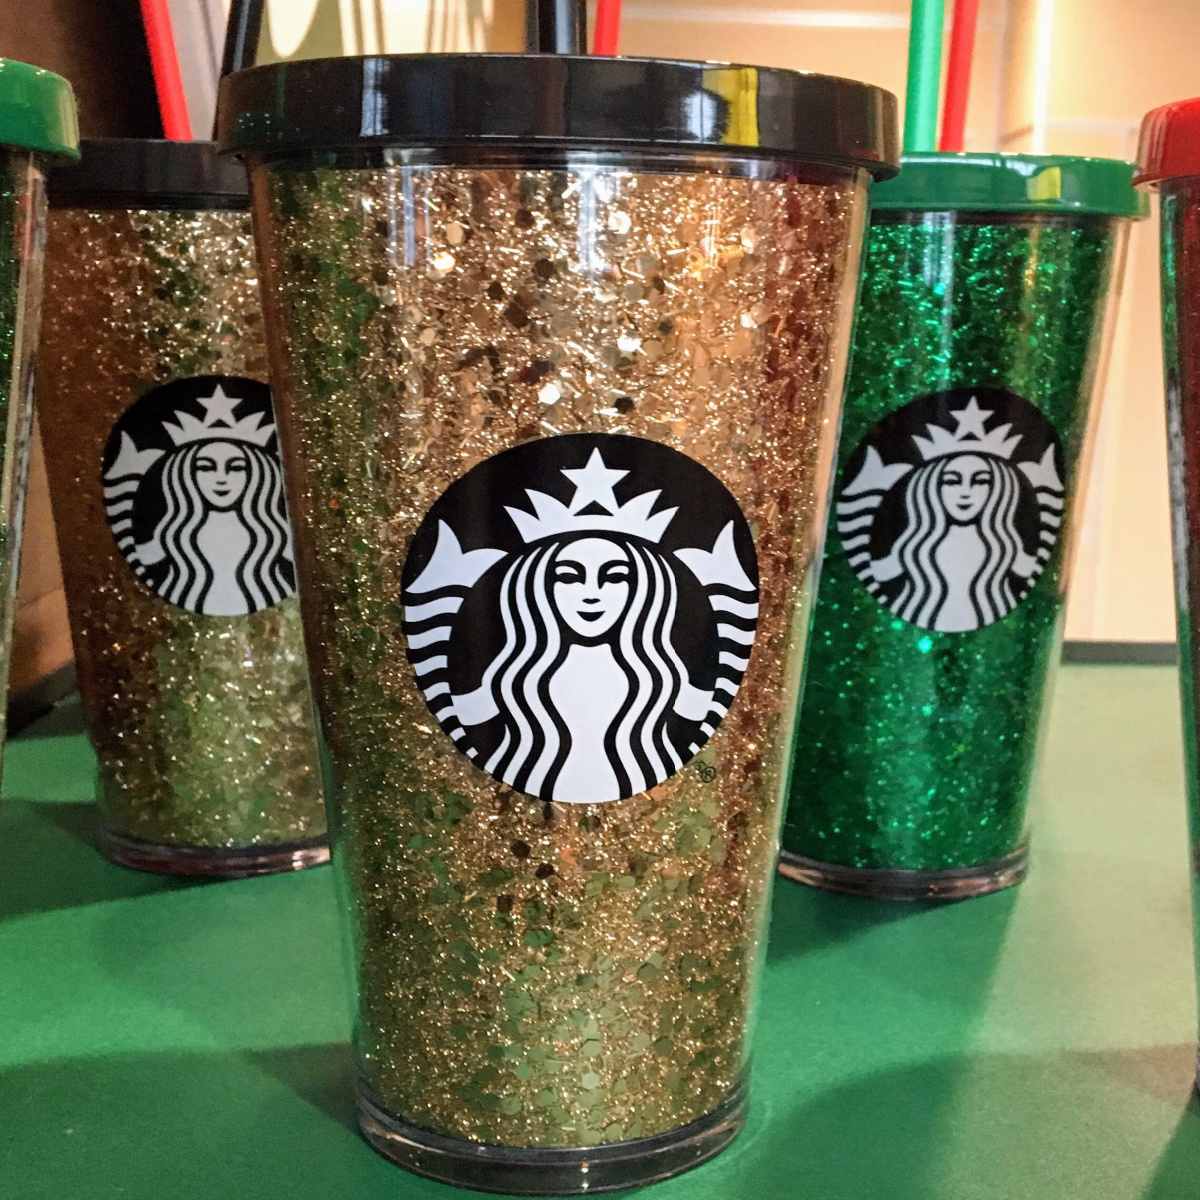 Starbucks 2022 Holiday Cups Are Here And You'll Want Them All - SHEfinds